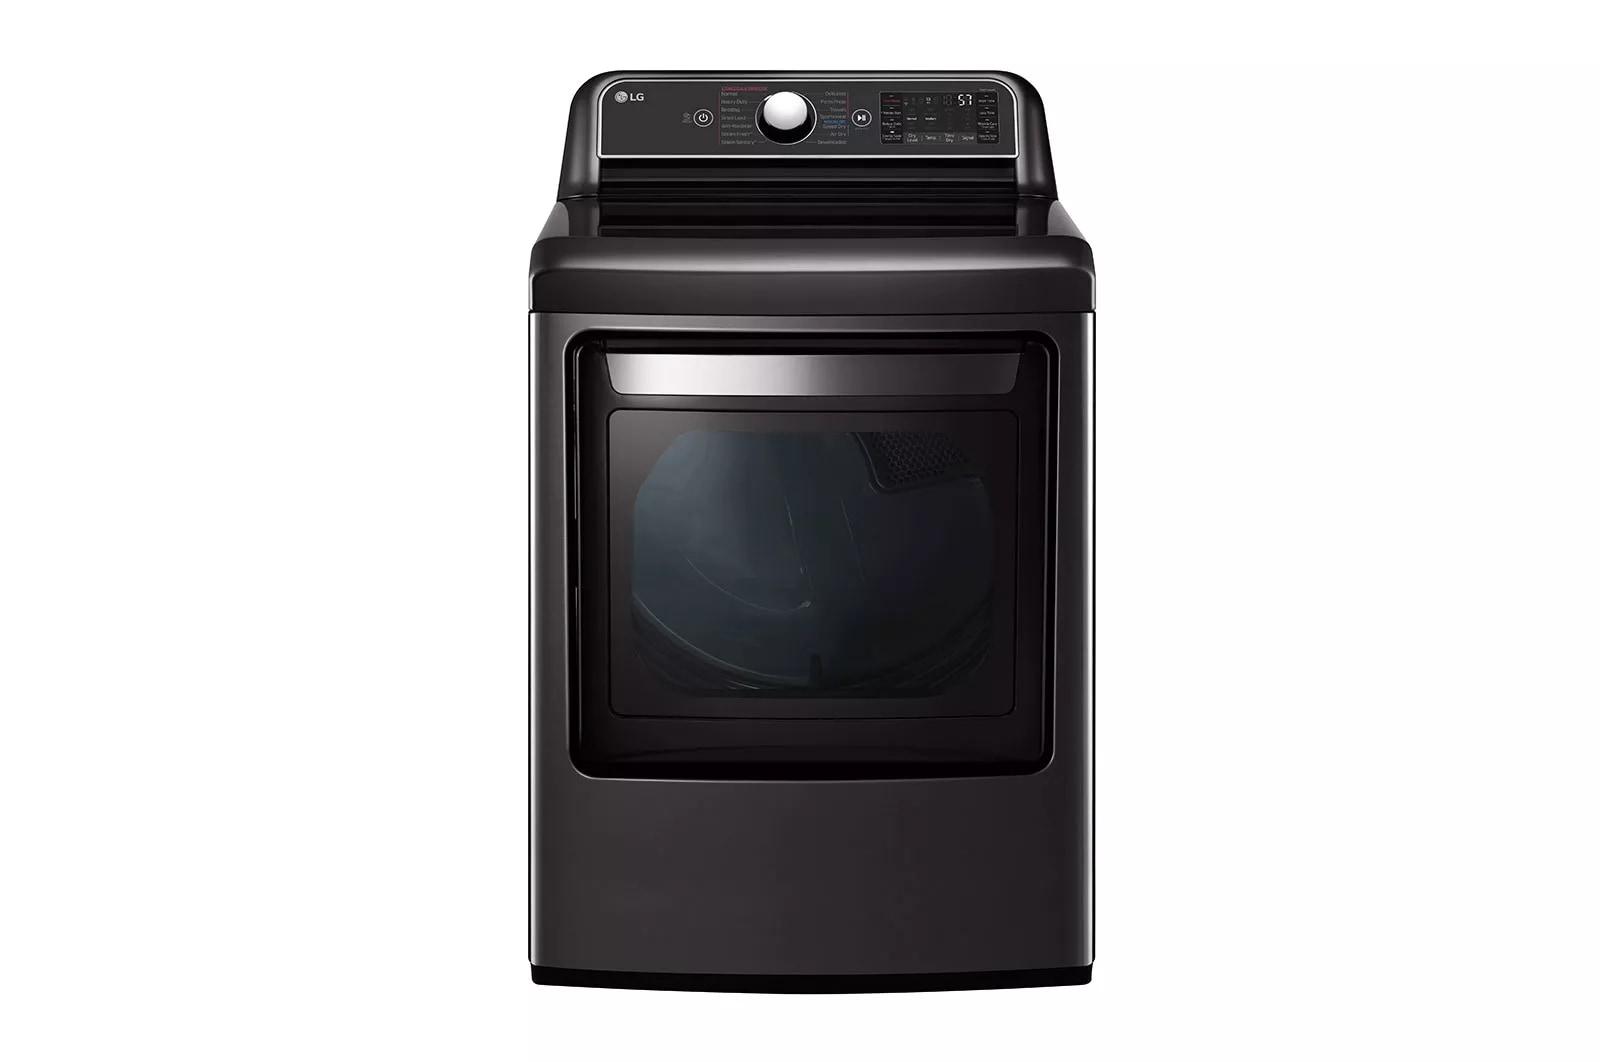 LG DLEX7900BE 7.3 Cu. Ft. Smart Wi-Fi Enabled Electric Dryer with TurboSteam - Black Steel - image 1 of 5